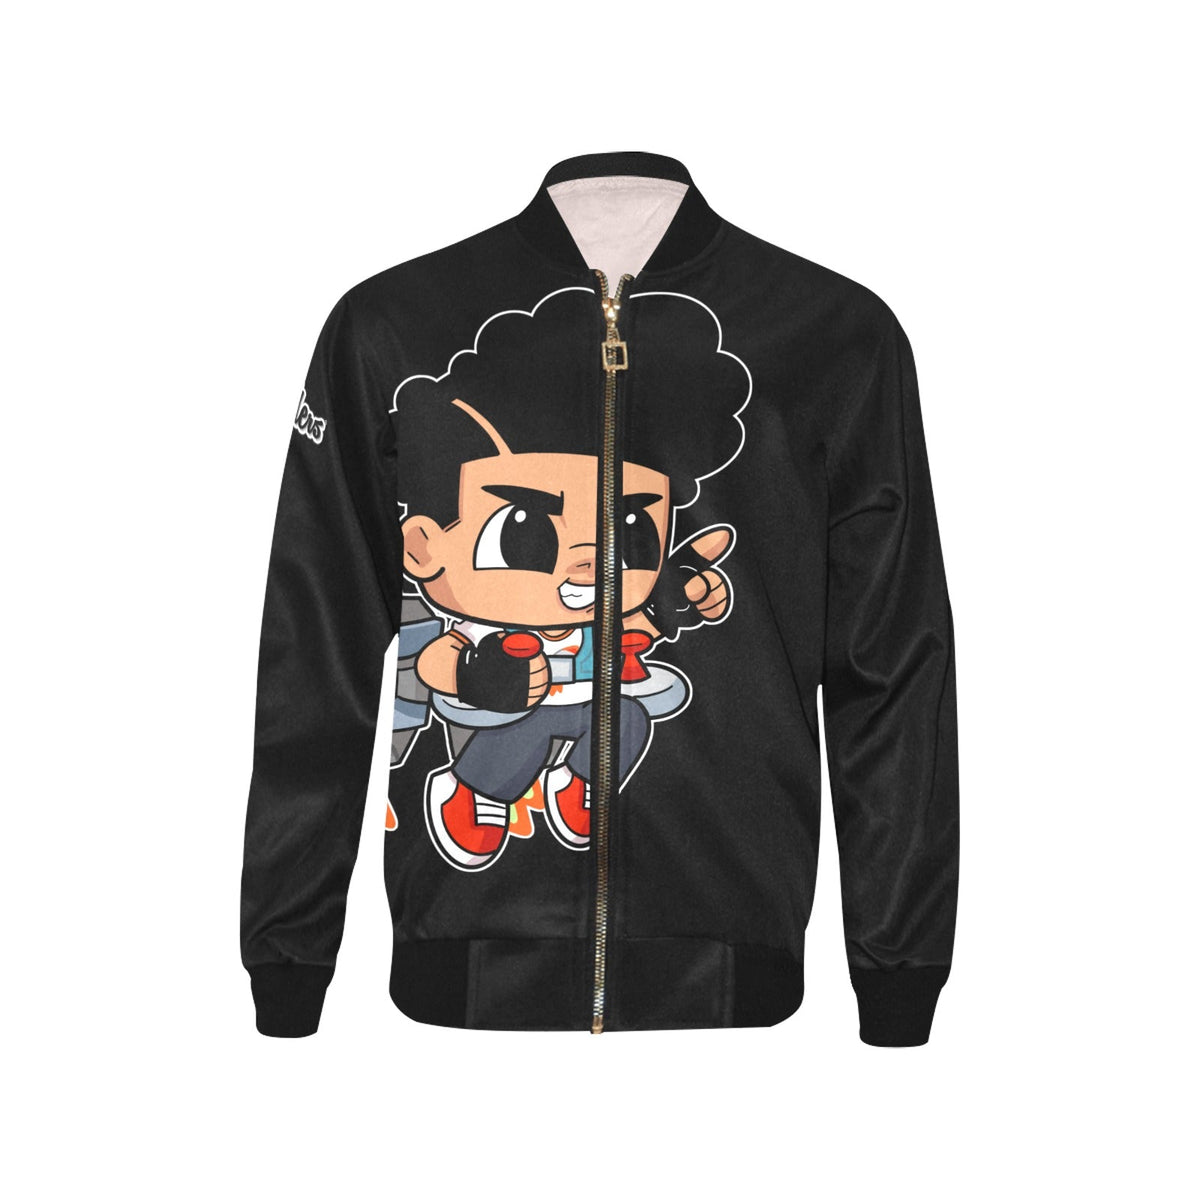 Lil Leaders® Bomber Jacket - Boys Characters